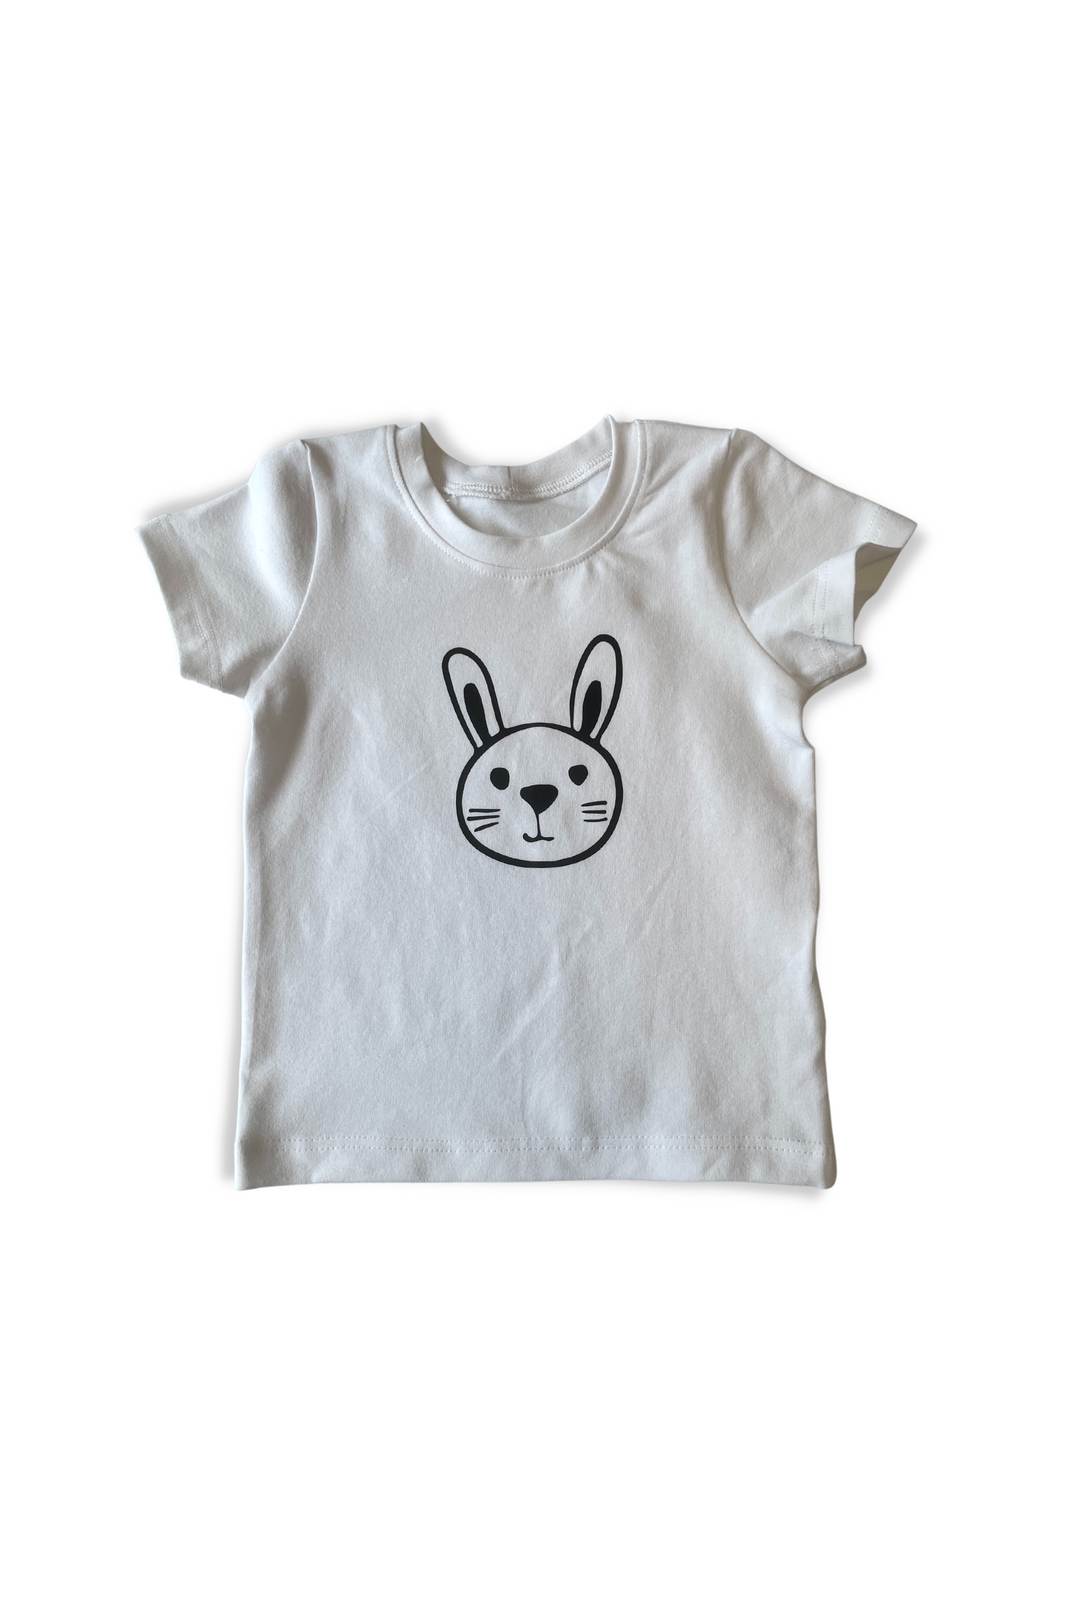 Baby t-shirt - Luc the Bunny - White